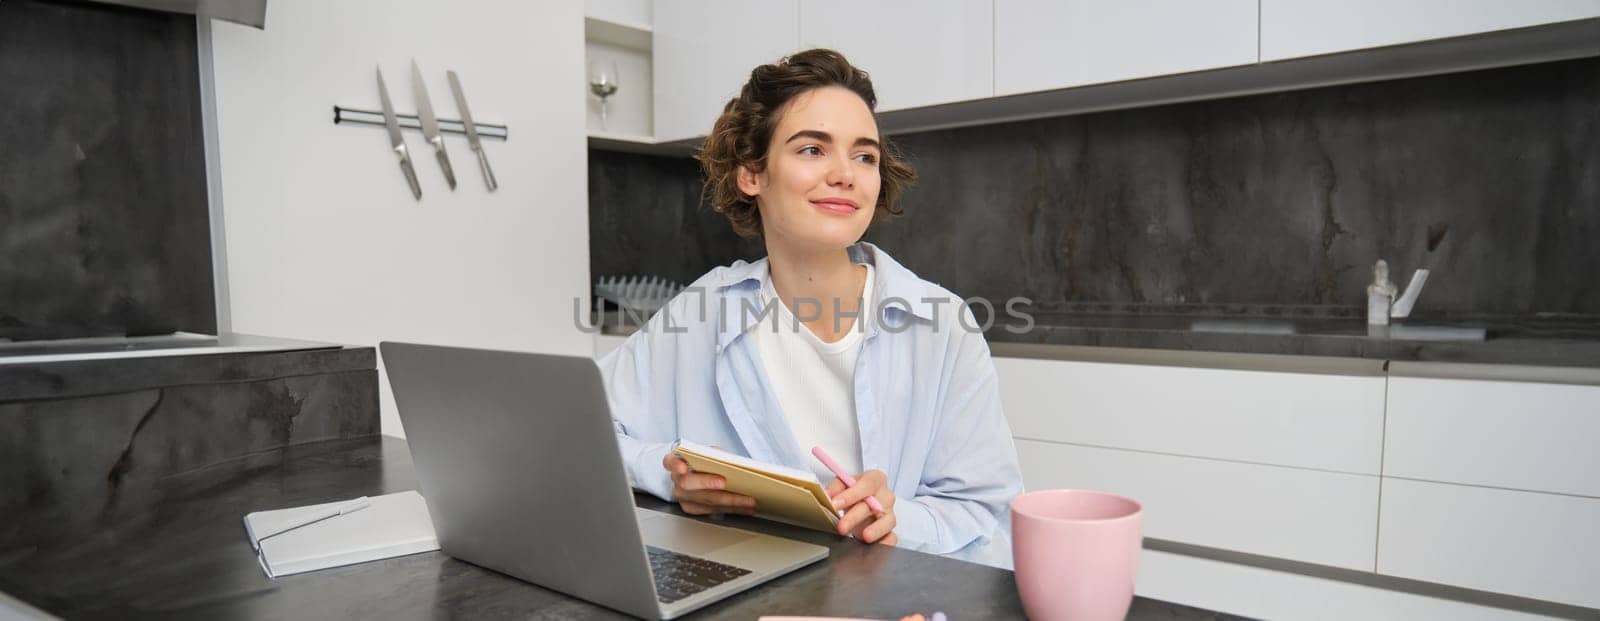 Image of young woman, entrepreneur works from home. Girl studies remote, writes down information, makes notes, uses laptop, does homework online.